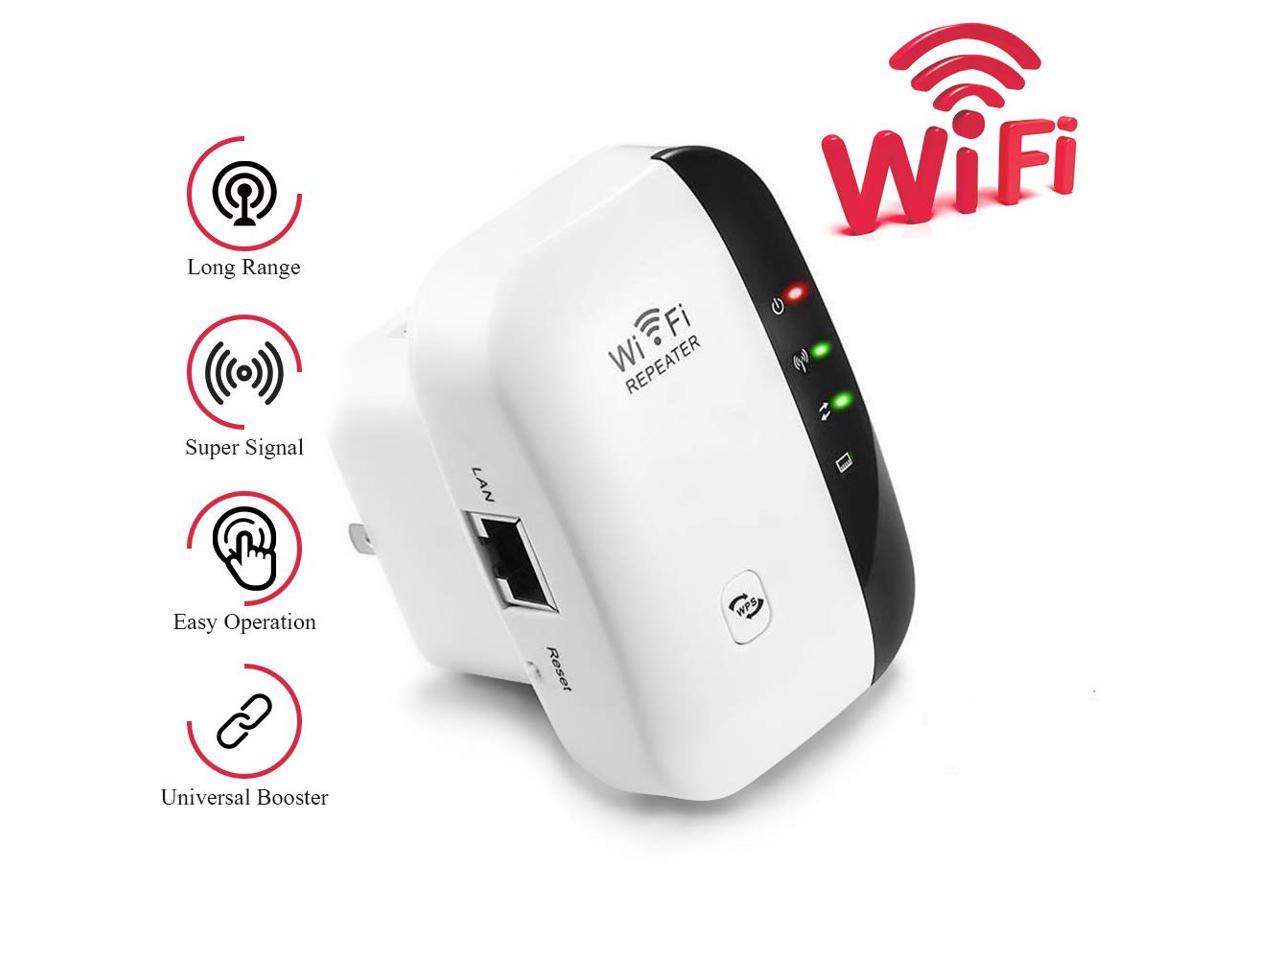 Extends WiFi Coverage to Smart Home Devices Range Network Compatible with Alexa WiFi Extender 300 Mbps Internet Signal Booster Wireless Repeater 2.4GHz Band up to 300 Mbps 